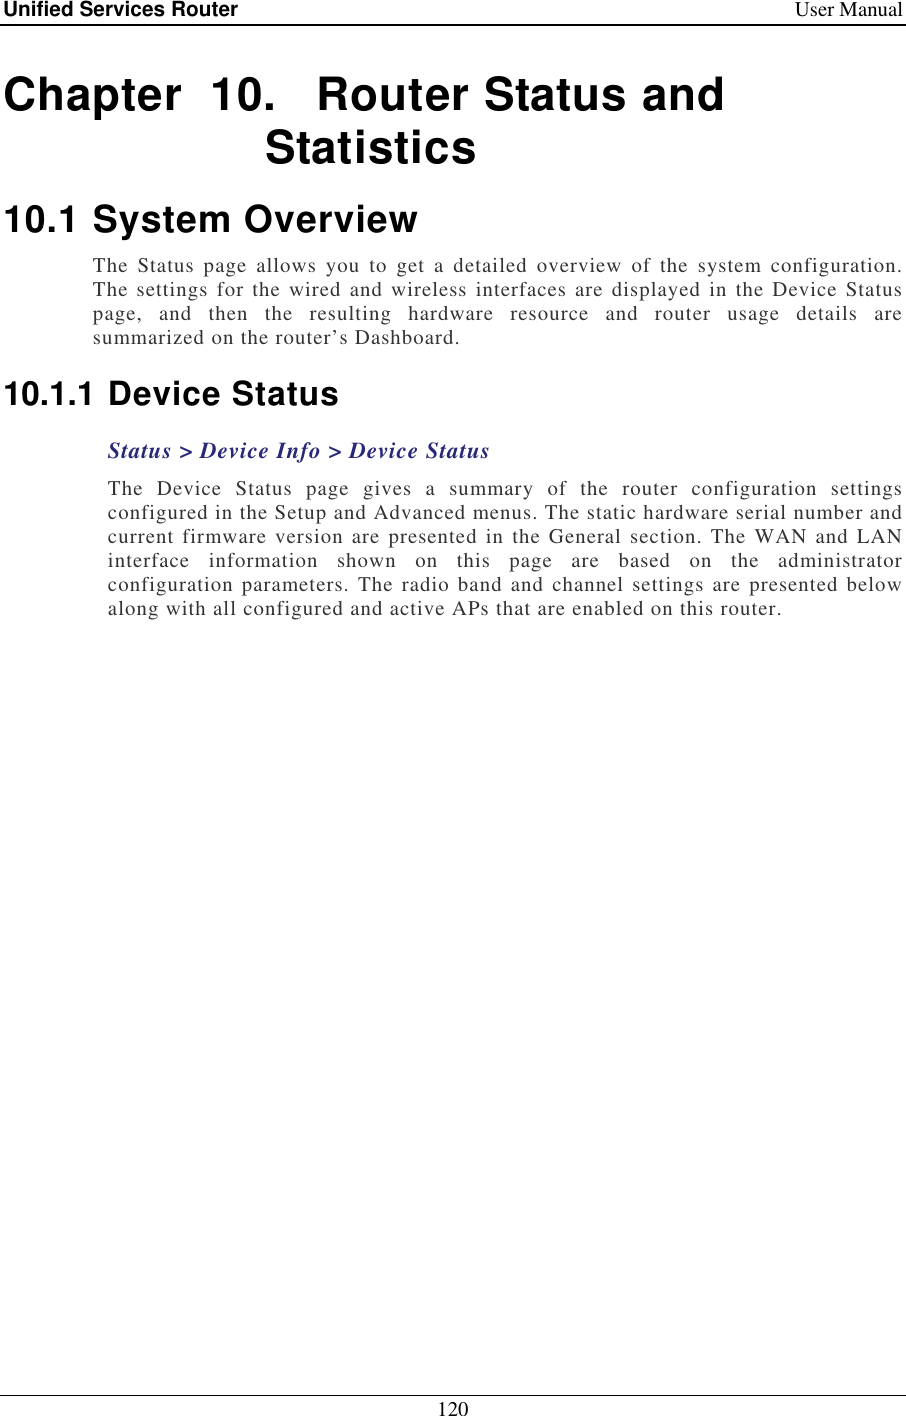 Unified Services Router    User Manual 120  Chapter  10.   Router Status and Statistics 10.1 System Overview The  Status  page  allows  you  to  get  a  detailed  overview  of  the  system  configuration. The  settings  for the wired and wireless interfaces are displayed  in the Device  Status page,  and  then  the  resulting  hardware  resource  and  router  usage  details  are summarized on the router’s Dashboard.  10.1.1 Device Status Status &gt; Device Info &gt; Device Status The  Device  Status  page  gives  a  summary  of  the  router  configuration  settings configured in the Setup and Advanced menus. The static hardware serial number and current  firmware  version are presented in the  General section.  The WAN and  LAN interface  information  shown  on  this  page  are  based  on  the  administrator configuration  parameters. The  radio band and channel  settings  are presented below along with all configured and active APs that are enabled on this router.  